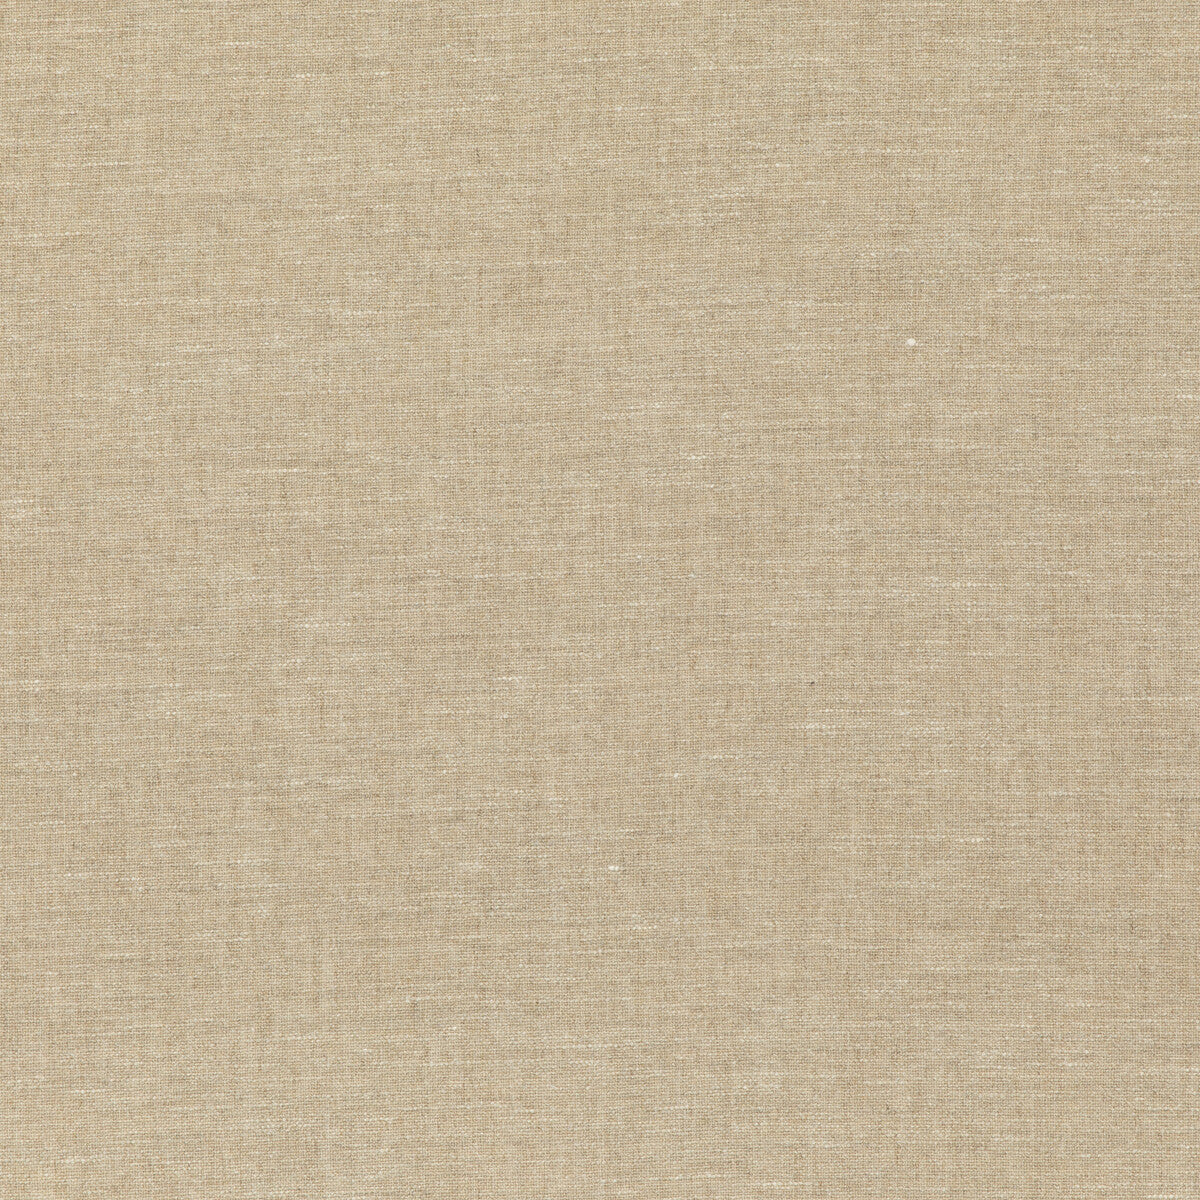 Avior fabric in linen color - pattern ED85326.104.0 - by Threads in the Luxury Weaves II collection